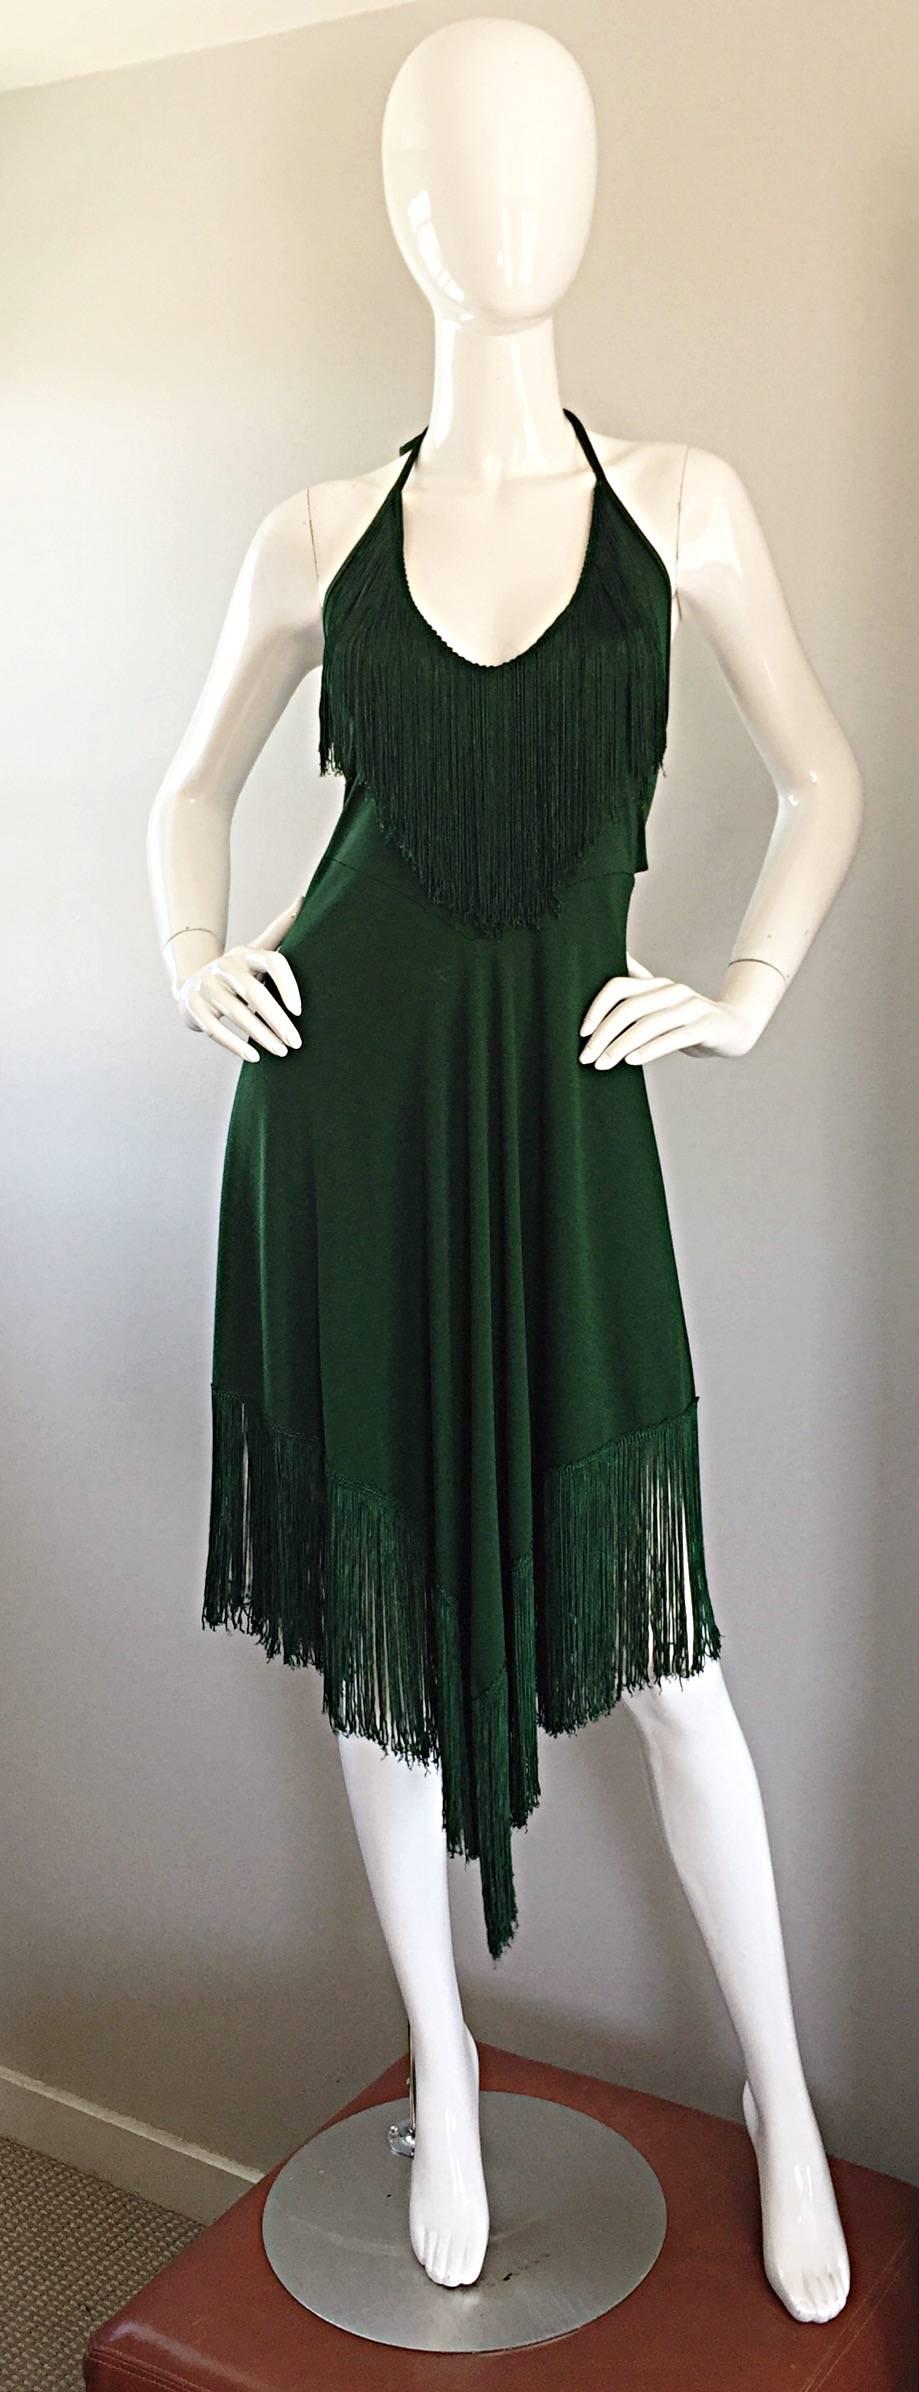 Absolutely smashing 70s DAVID HOWARD deep green halter fringe dress! There are so many incredible details to this gem that I do not even know where to begin! Halter neck with a cut-out (peek-a-boo) back. Fringe detail at bust and at handkerchief